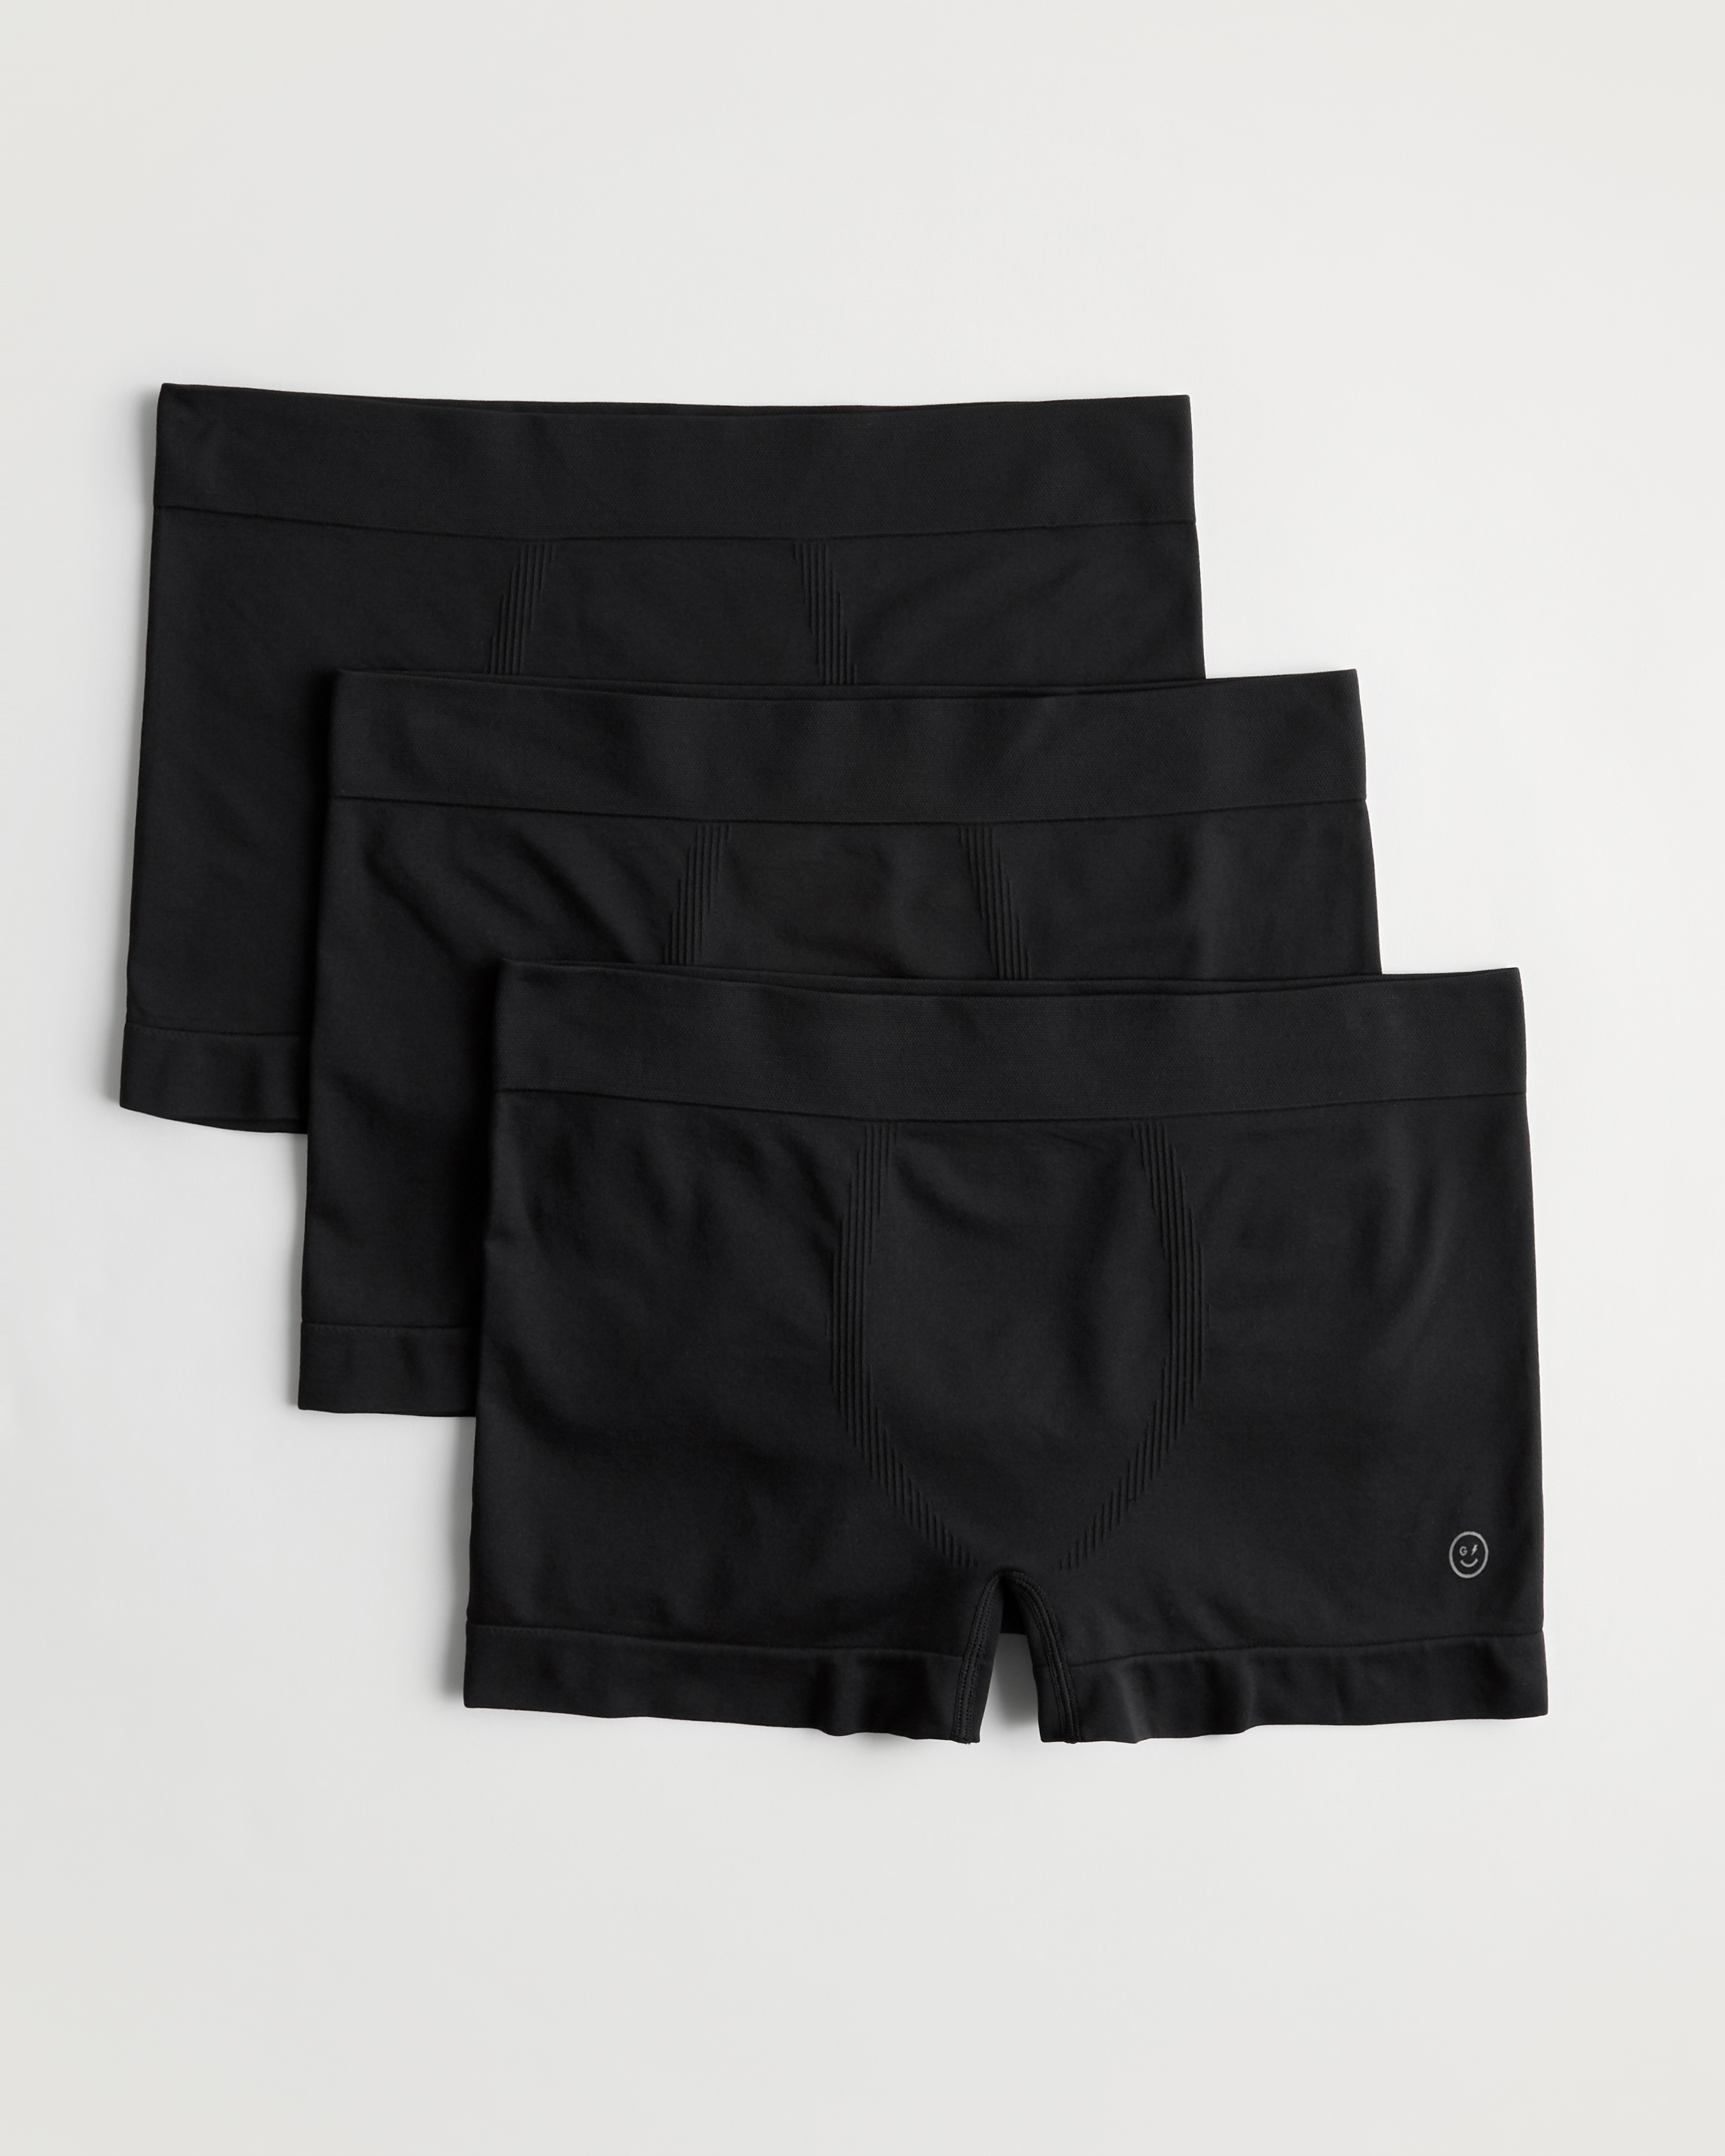 Gilly Hicks 3 pack boy shorts